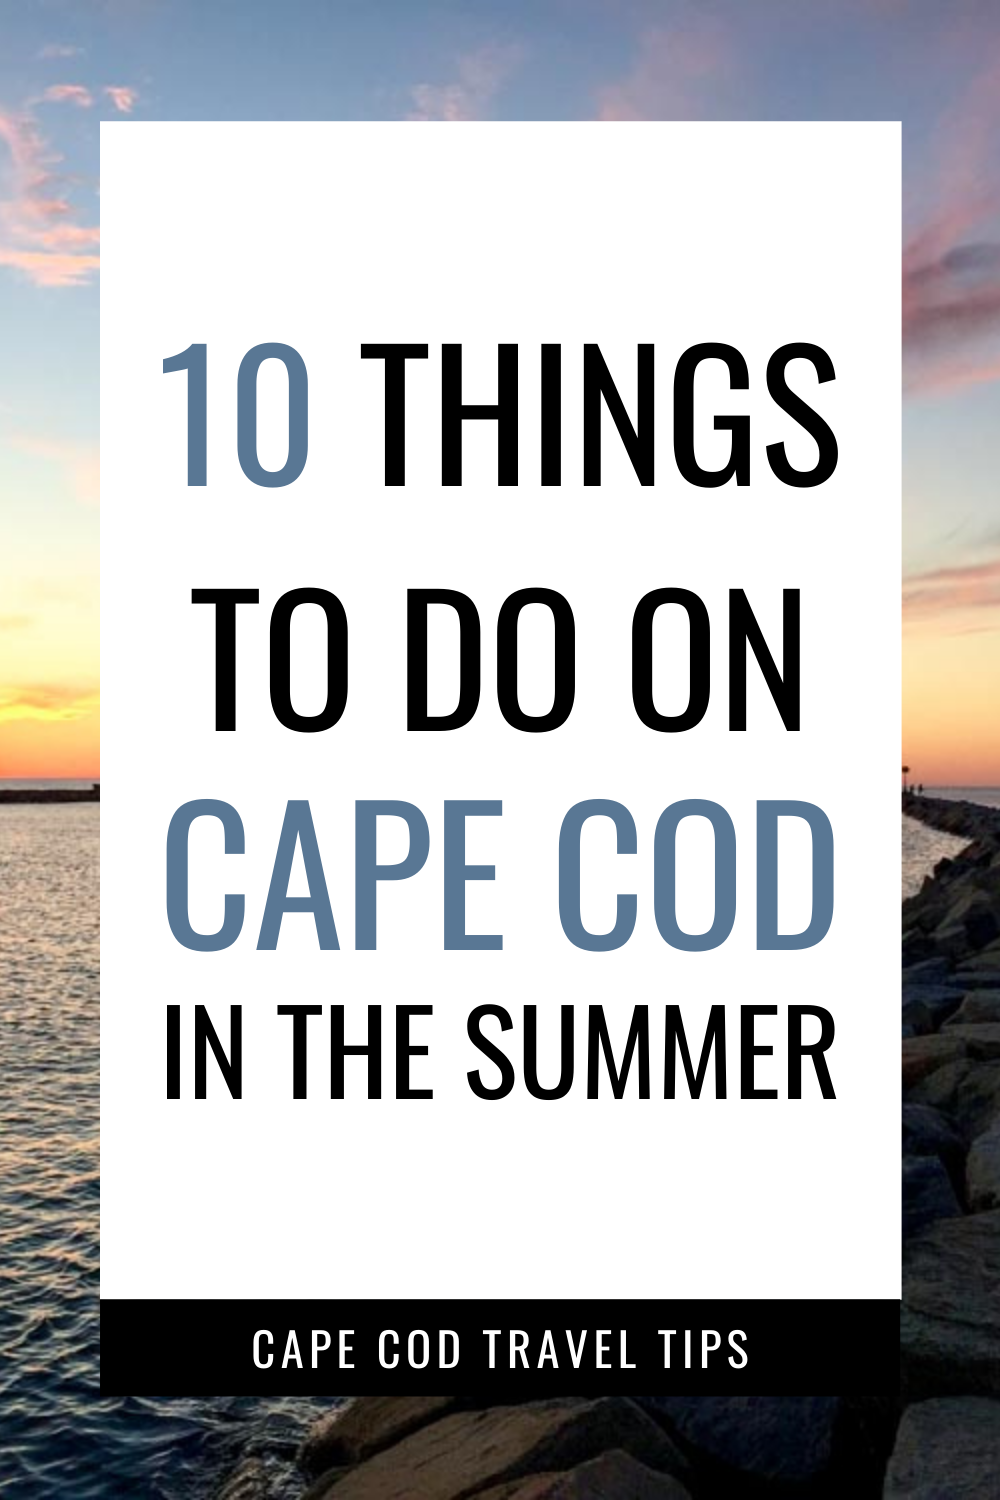 10 Things to Do On Cape Cod in the Summer to Get That Old Cape Cod Feel from Cape Cod Travel Tips |  Suggestions for things to do on Cape Cod in the summer that evokes that old Cape Cod feel. These classic activities are a must-do for everyone. | cape cod things to do summer, summer on cape cod